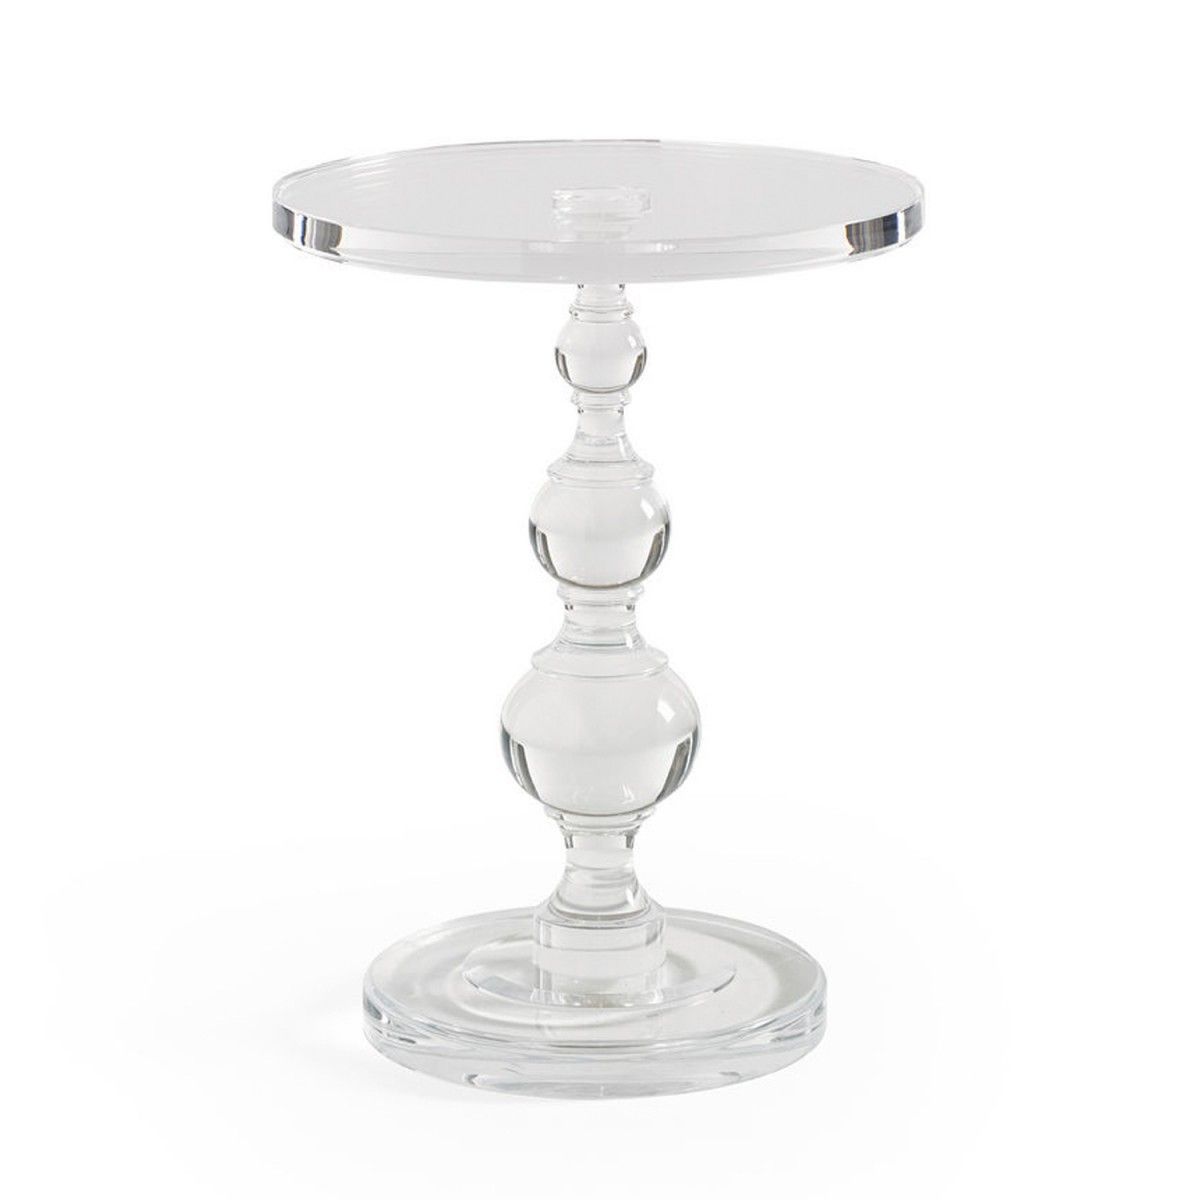 caracole all clear side table did projects furniture home acrylic zella accent tables living room candelabra inc stacked crystal lamp kids drum throne sheesham backyard small pub